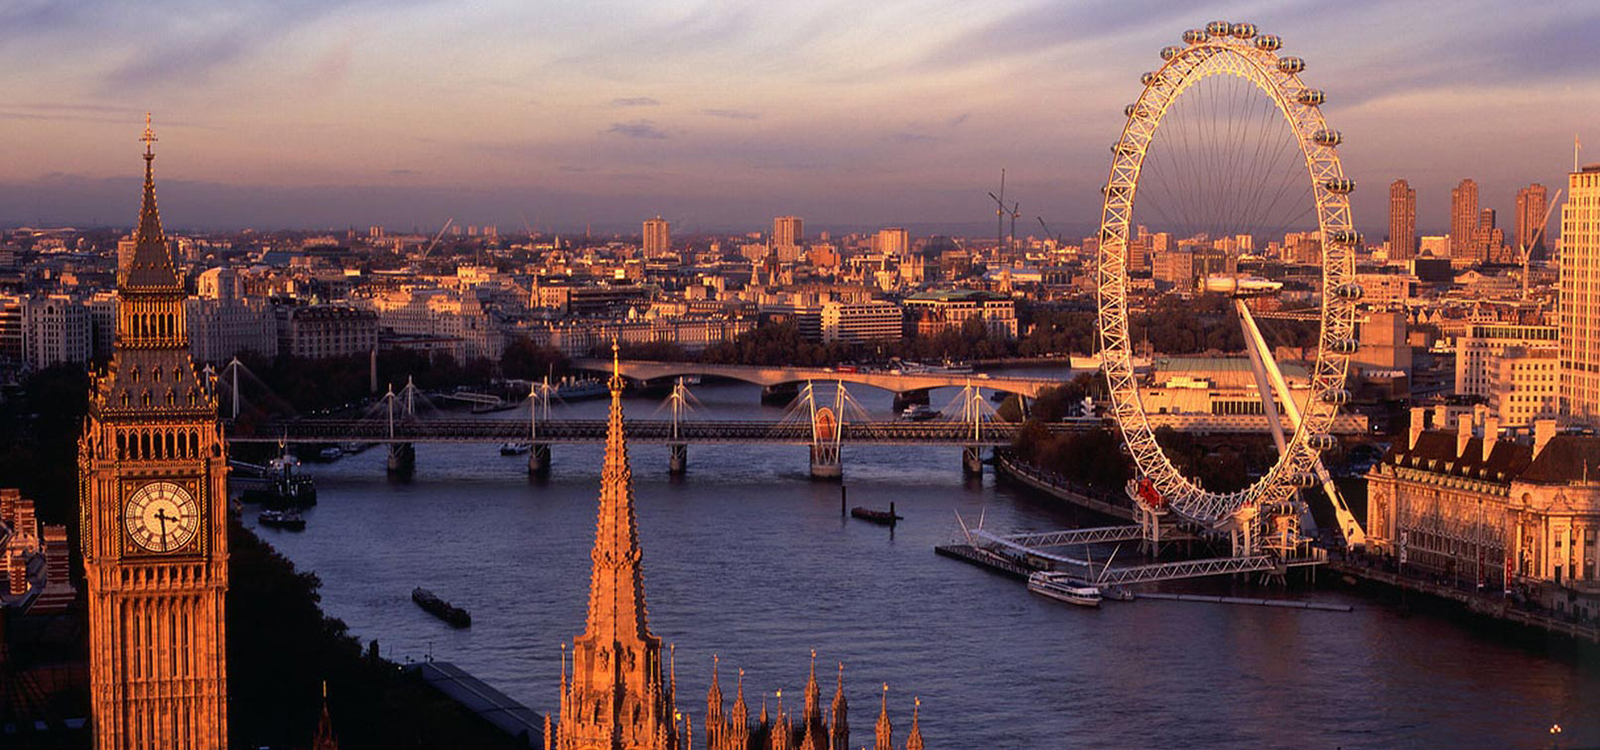 THE WORLD'S MOST VISITED CITY- After a several-year bout with Bangkok, London has regained its place as the world's most visited city, according to MasterCard's 2014 Global Destinations City Index. The city sees about 18.69 million international visitors annually, generating 19.3 billion dollars in revenue.